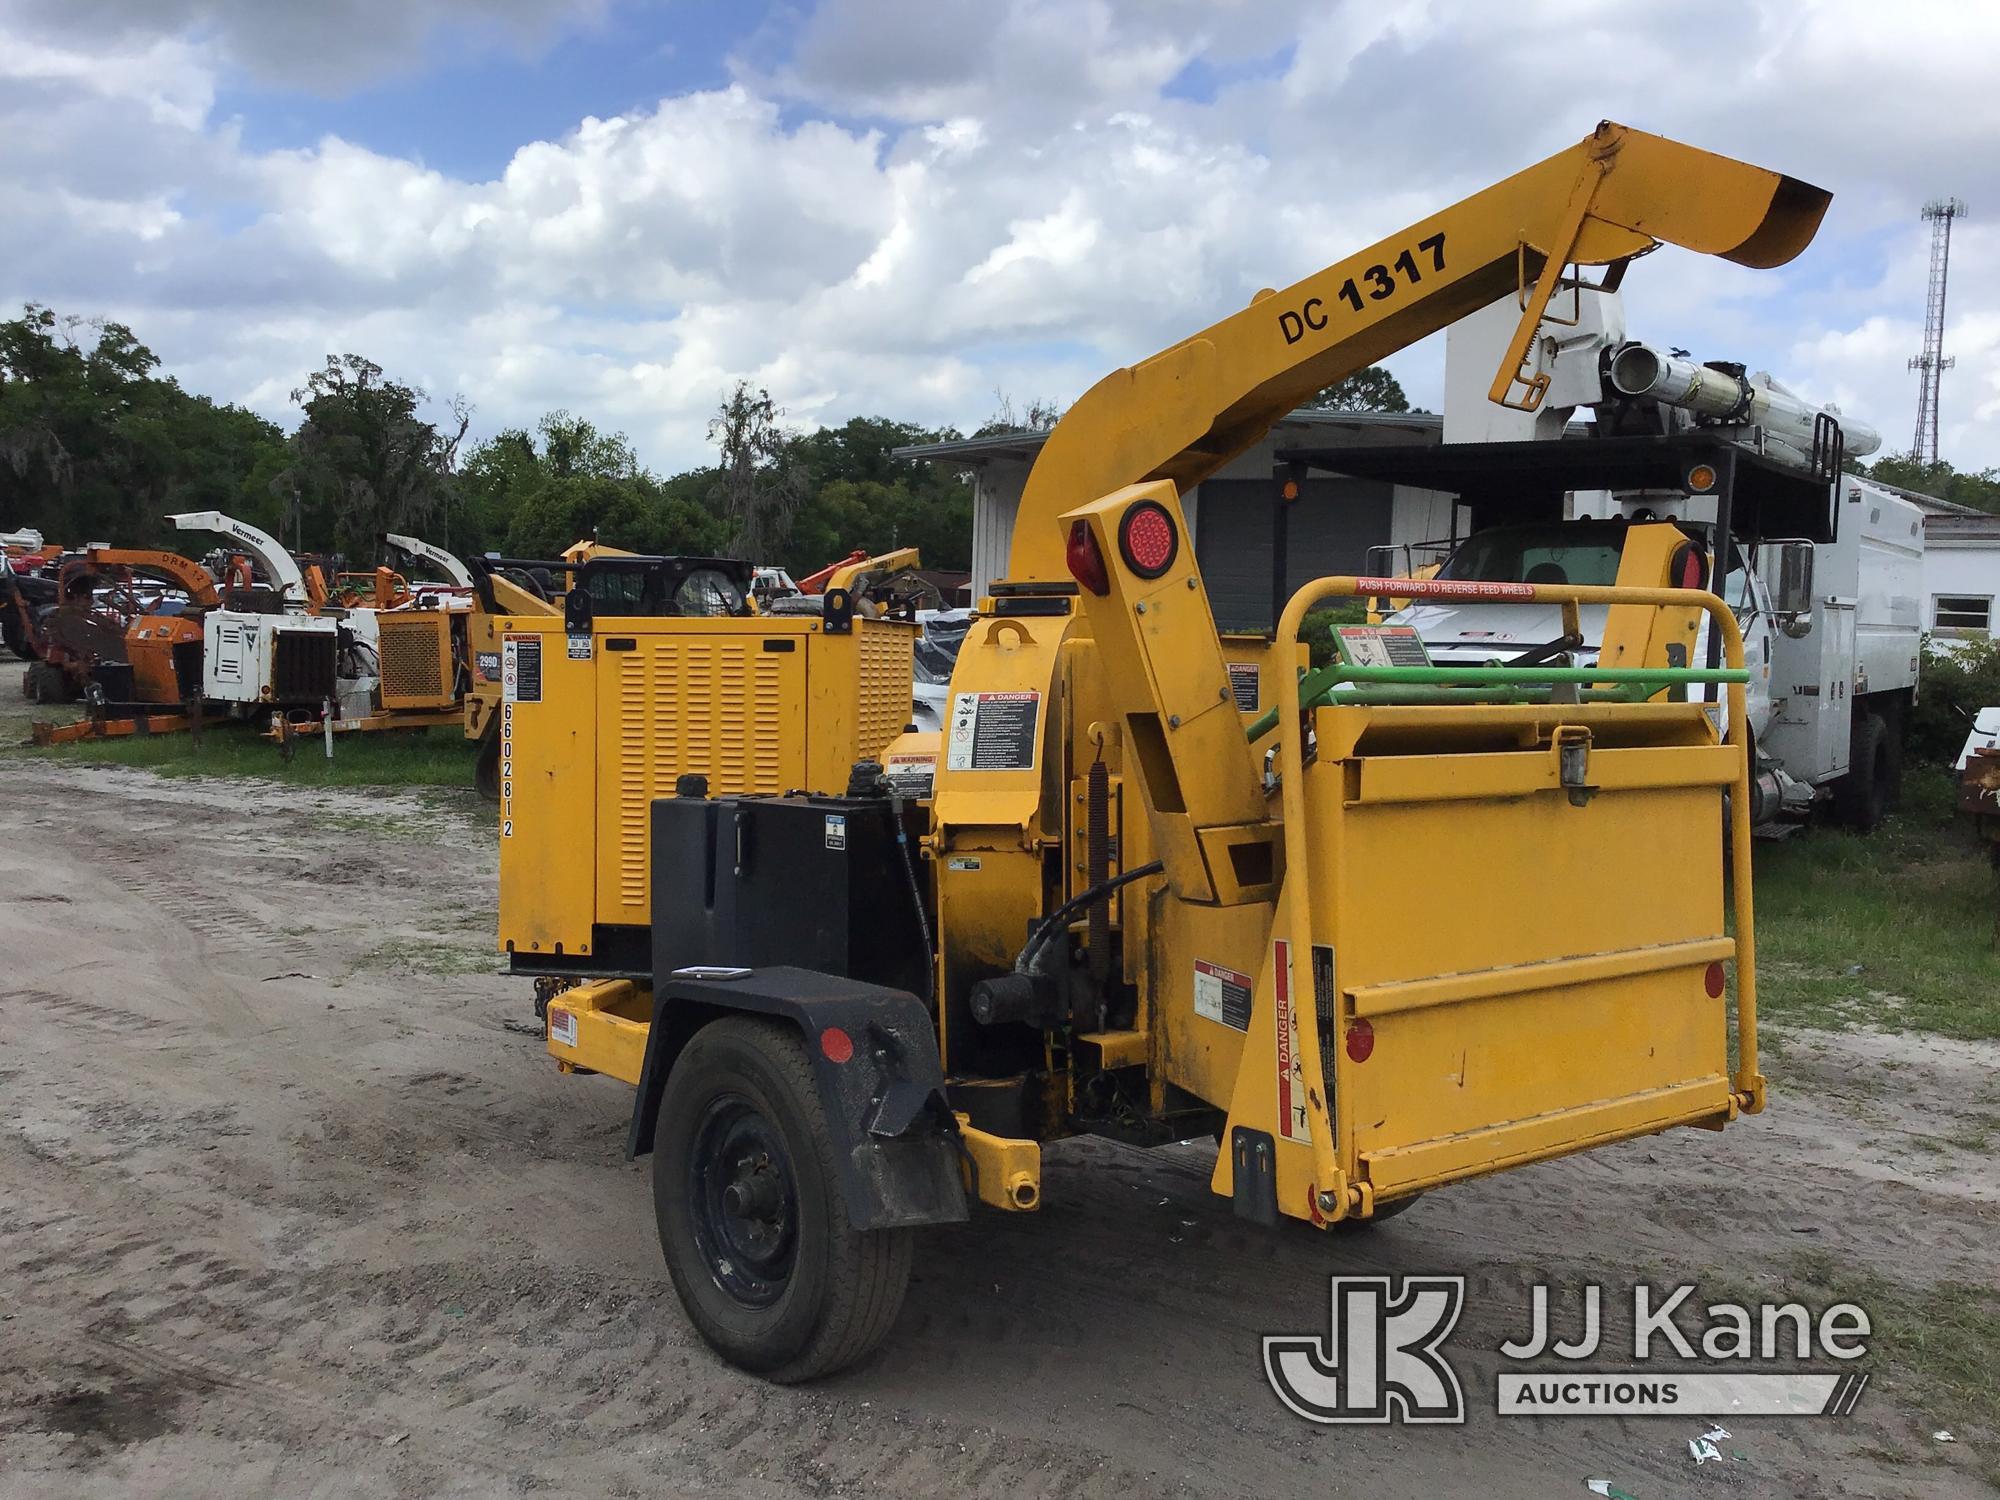 (Ocala, FL) 2017 Altec DC1317 Chipper (13in Disc) Not Running, Condition Unknown, Cranks, Missing Ba